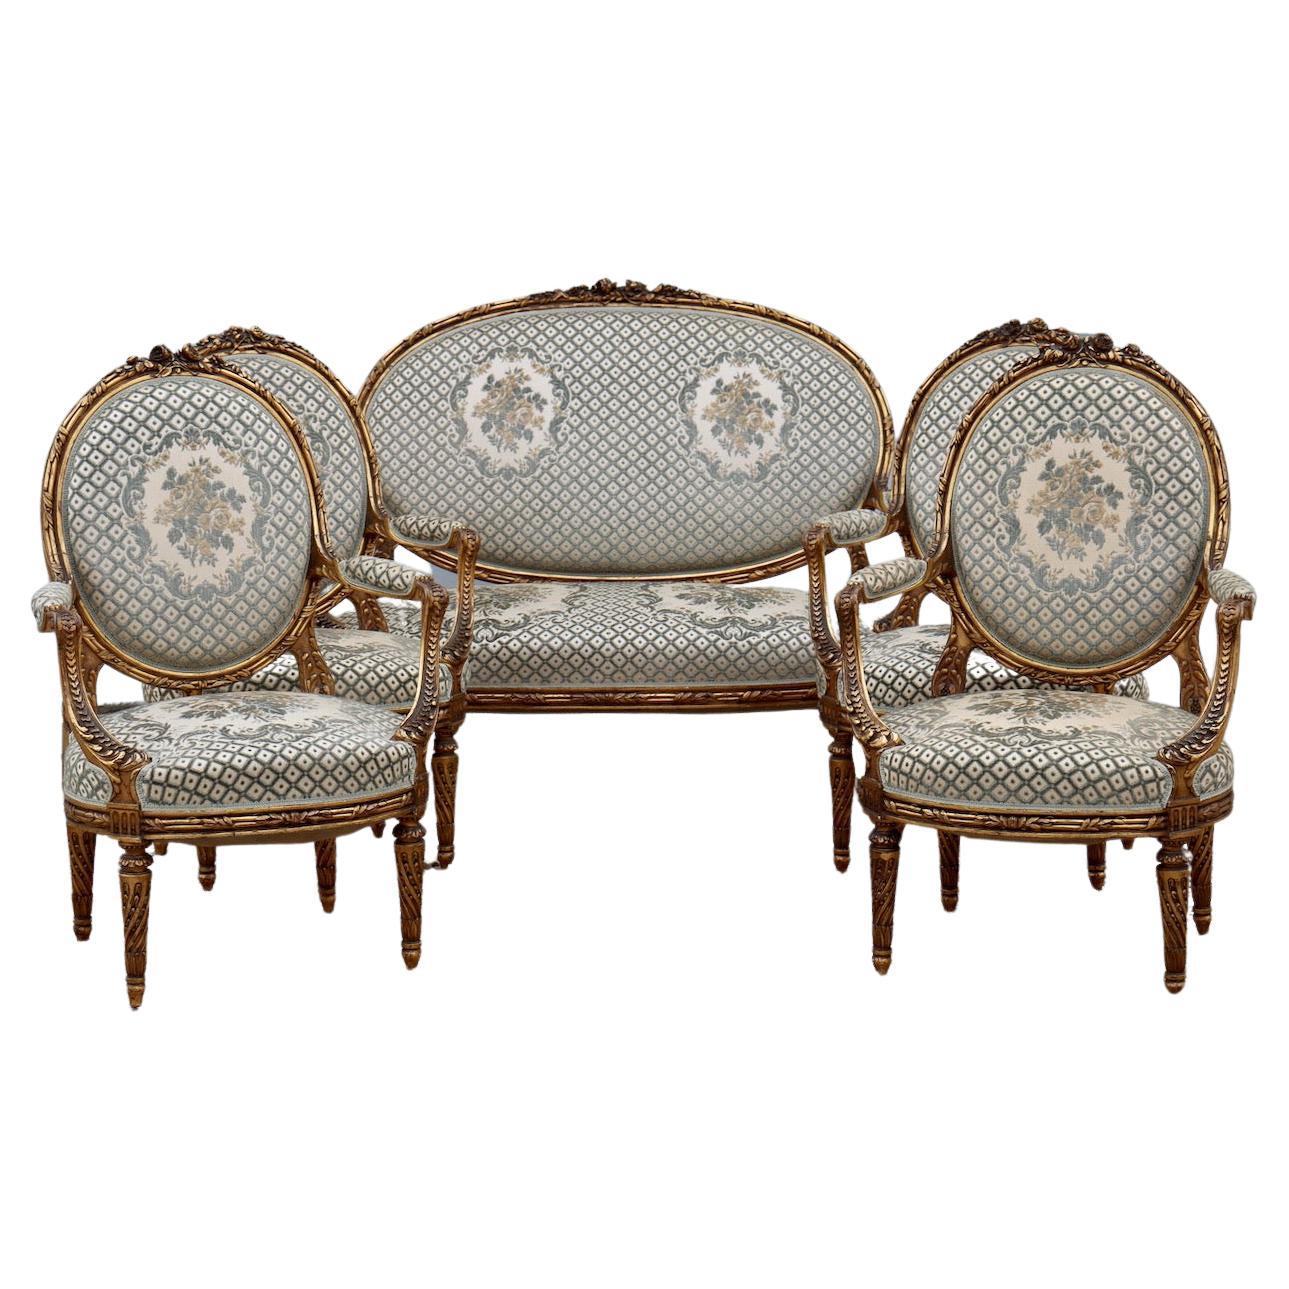 A Napoleon III Louis XVI Style Mobilier de Salon 

In gilded, moulded and very finely carved wood
Comprising a sofa and four large armchairs “à la Reine”, with medallion back topped with a ribbon and flowers, two with different design of flowers,